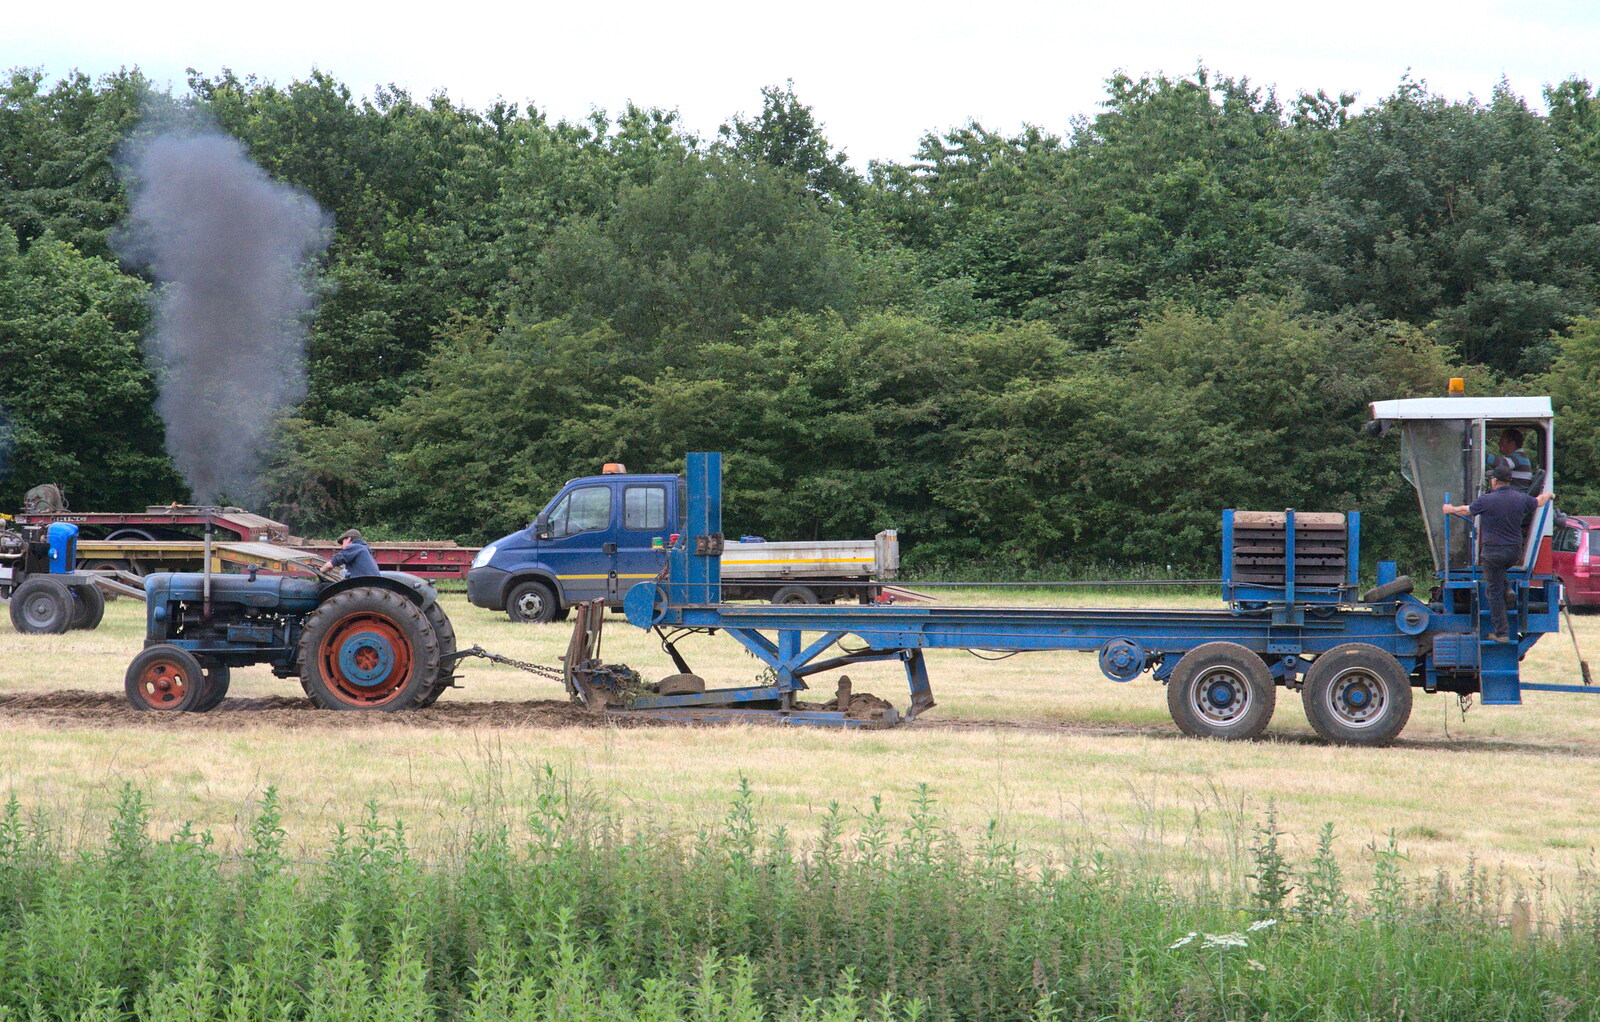 A bit of tractor pulling occurs from The Formerly-Known-As-The-Eye-Show, Palgrave, Suffolk - 17th June 2018